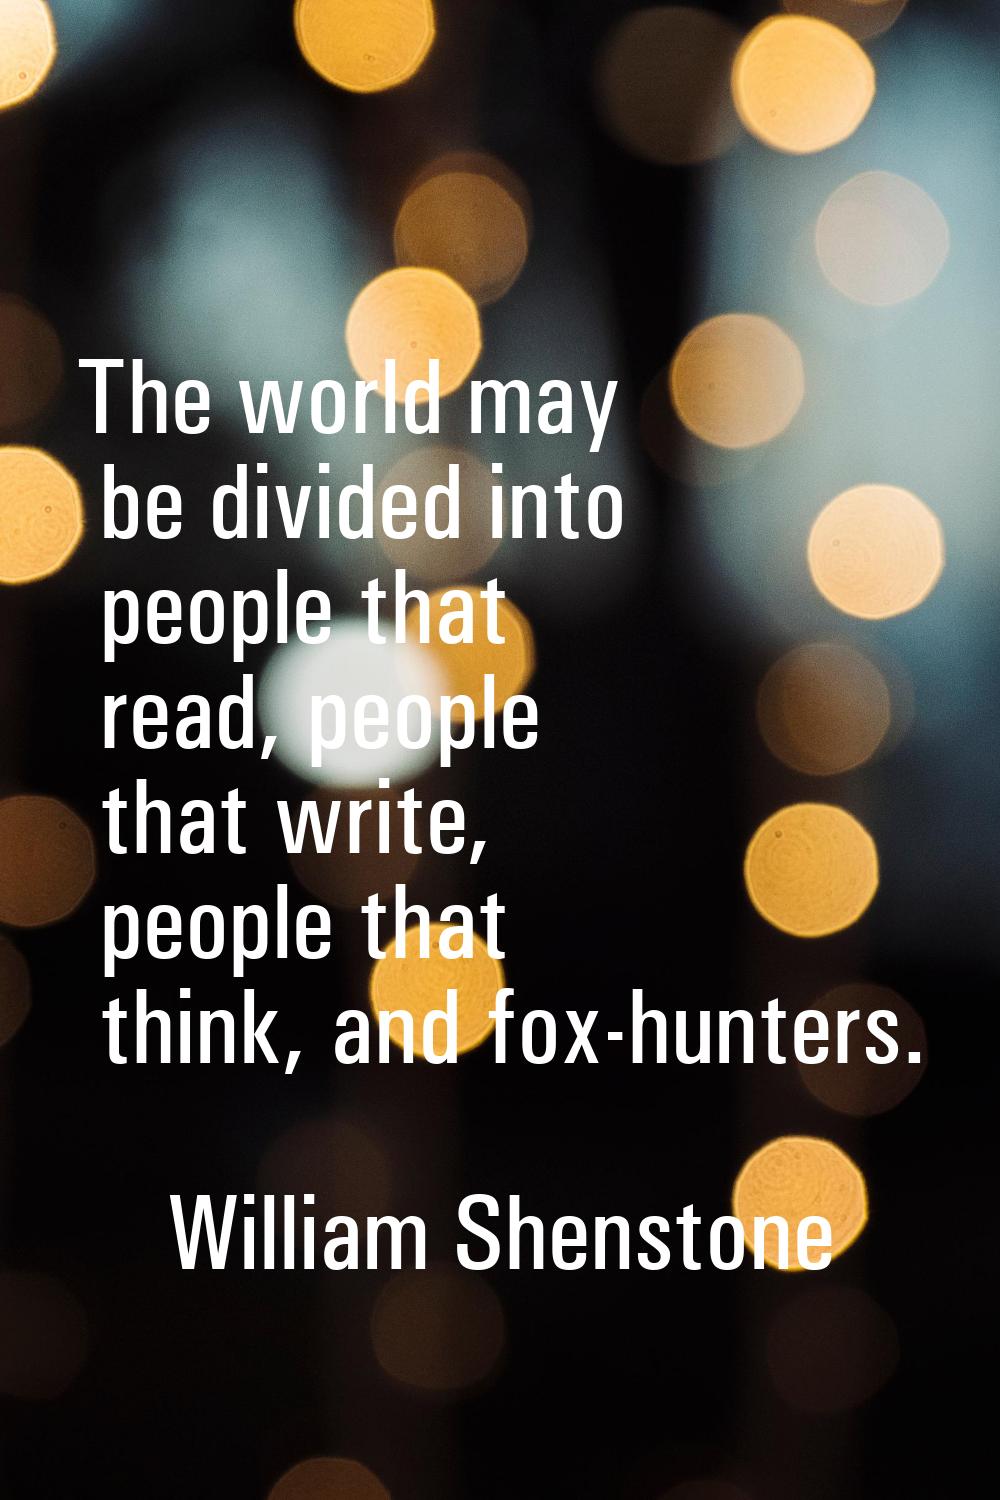 The world may be divided into people that read, people that write, people that think, and fox-hunte